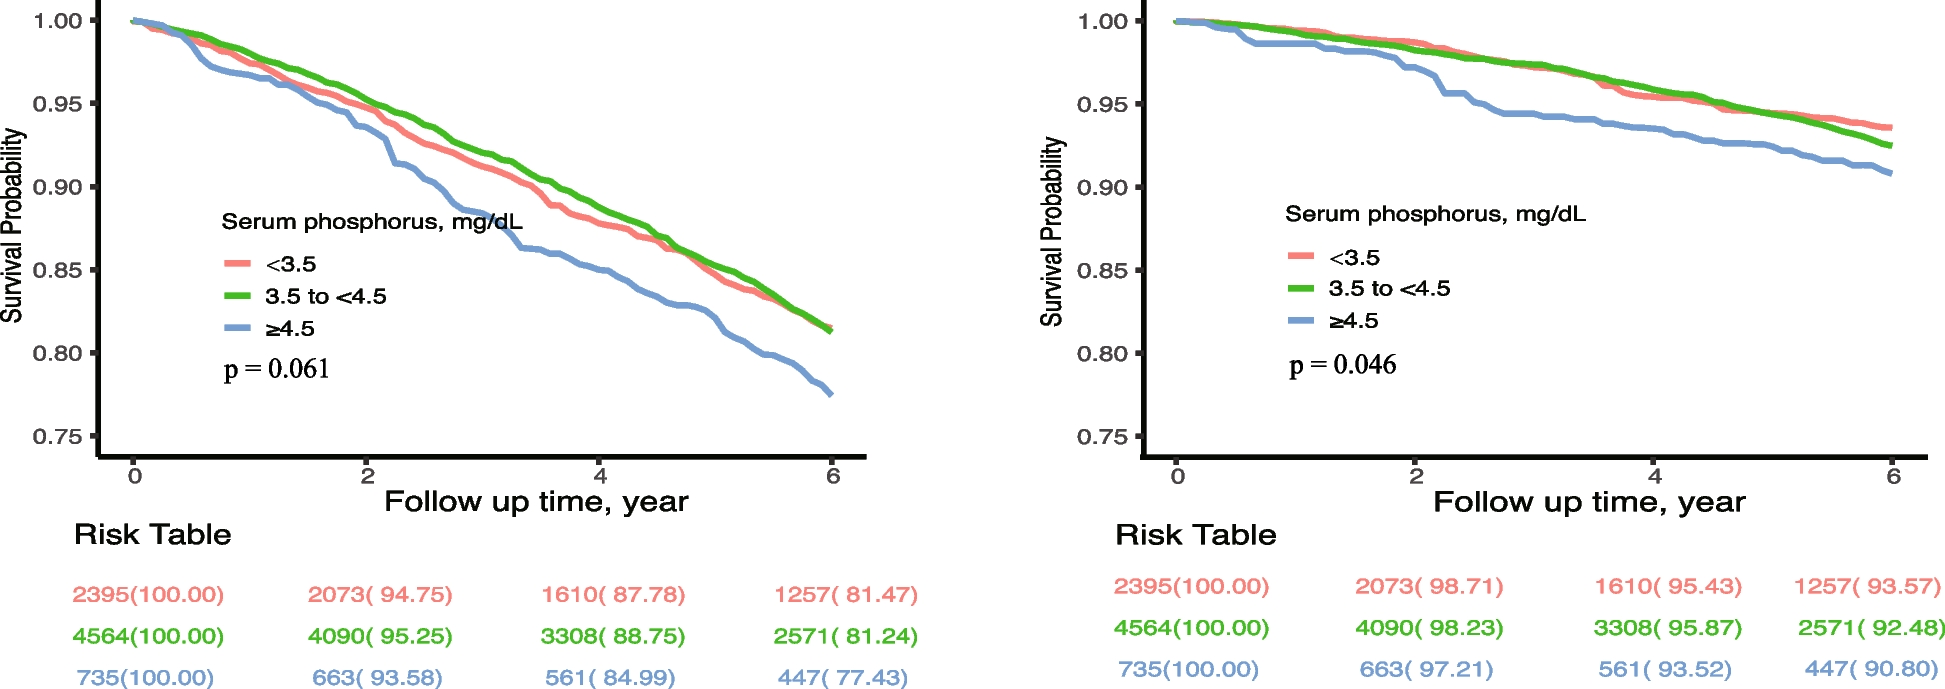 Relationship between serum phosphorus and mortality in non-dialysis chronic kidney disease patients: evidence from NHANES 2001–2018